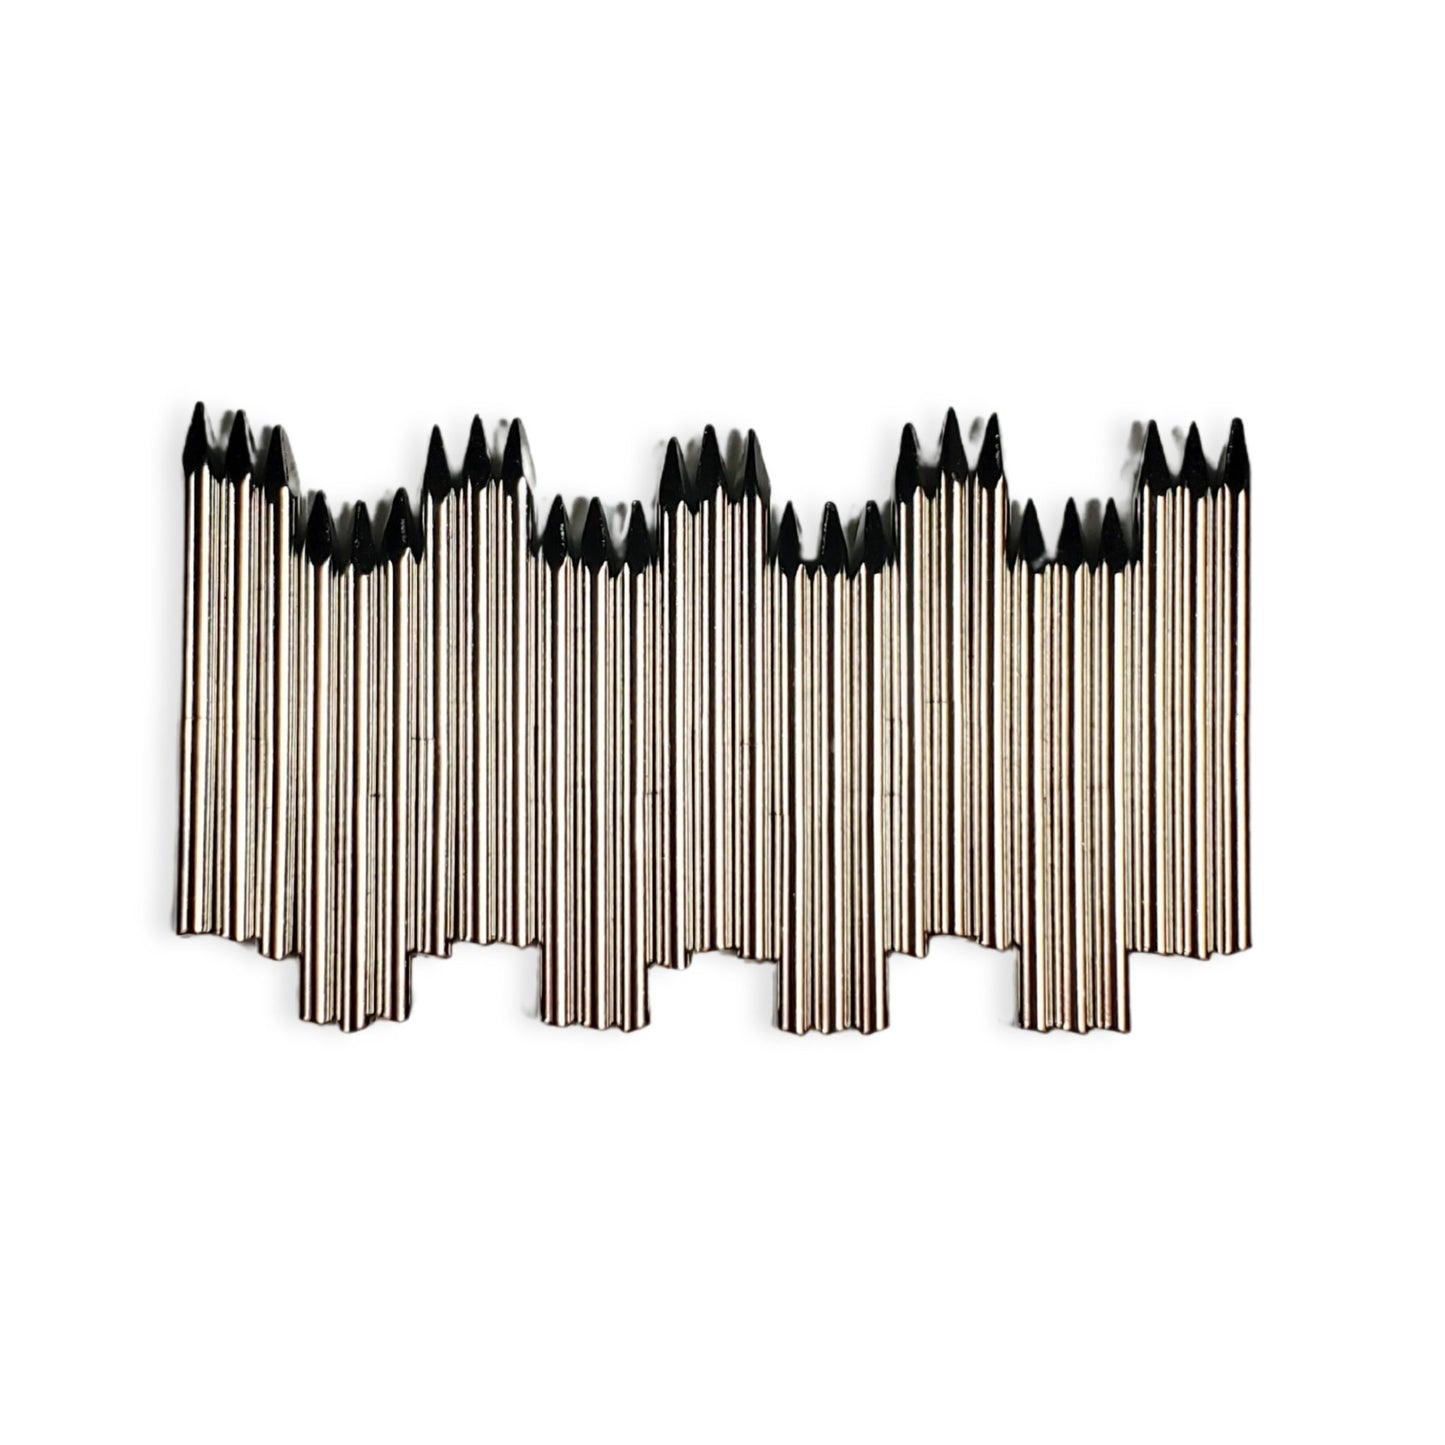 EMUS Replacement Nails for Orff Instruments (3.5cm and 4.4cm) - Empire Music Co. Ltd-Glockenspiels & Xylophones-EMUS